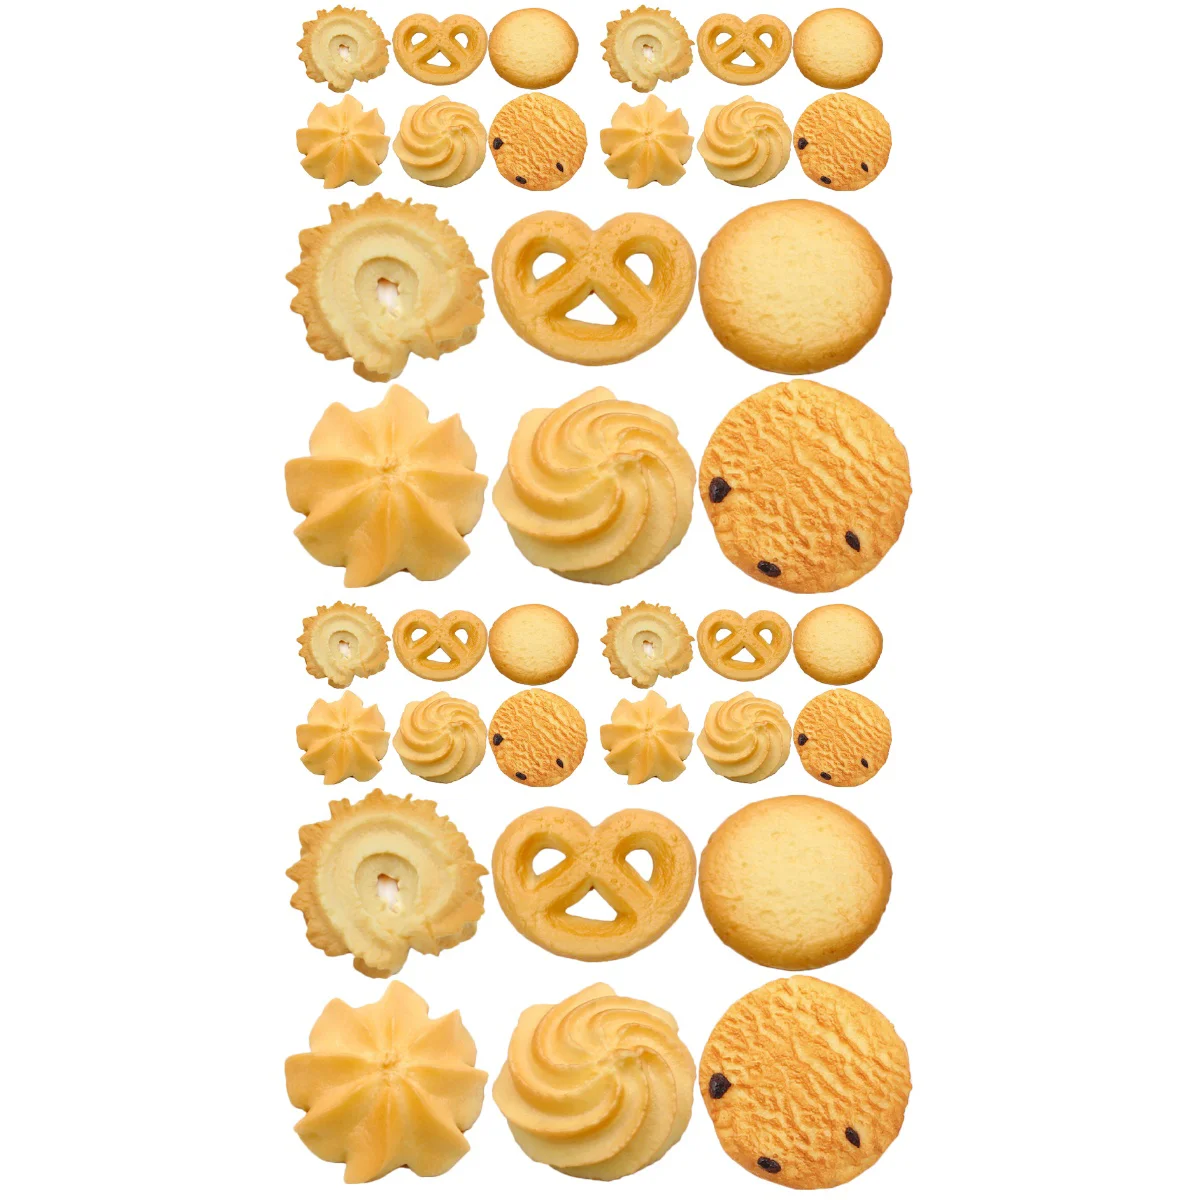 

36 Pcs Cookies Model Chocolate Biscotti Realistic Biscuit Oatmeal Fake Adornment Pvc Biscuits Child Play Toy